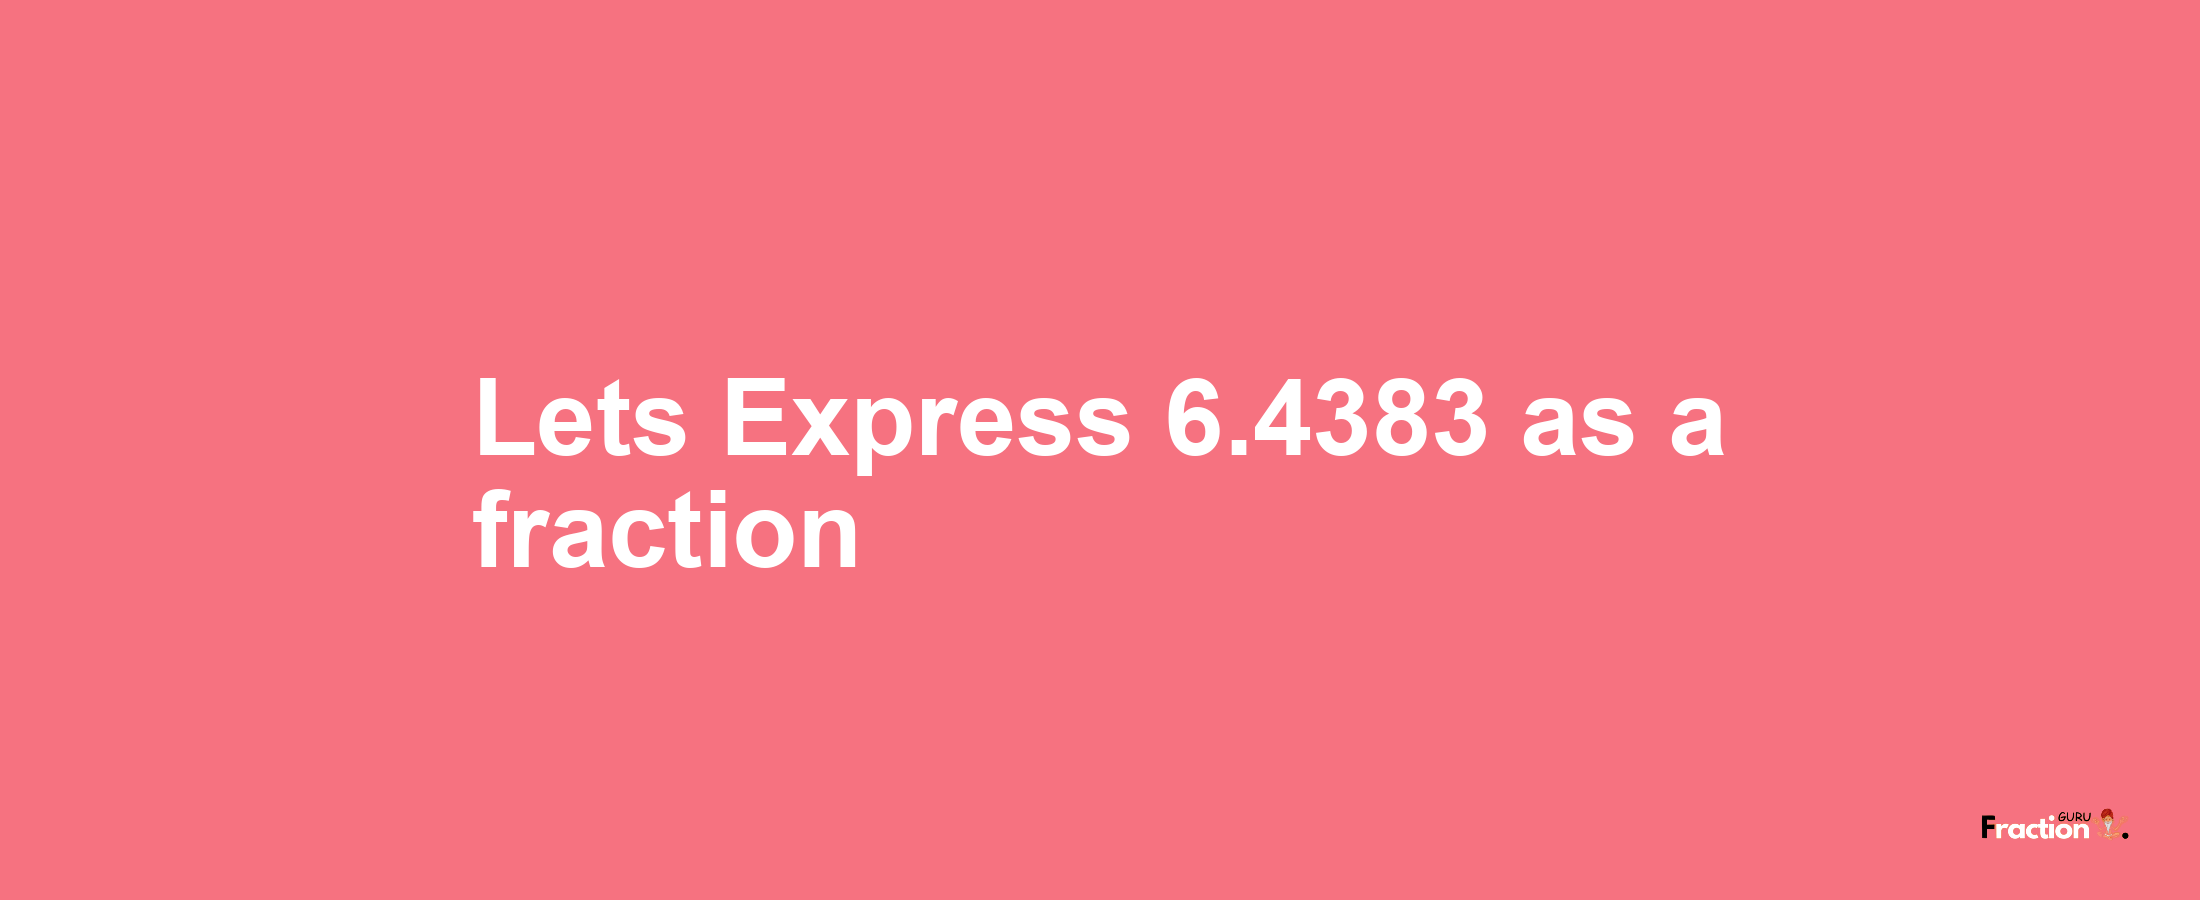 Lets Express 6.4383 as afraction